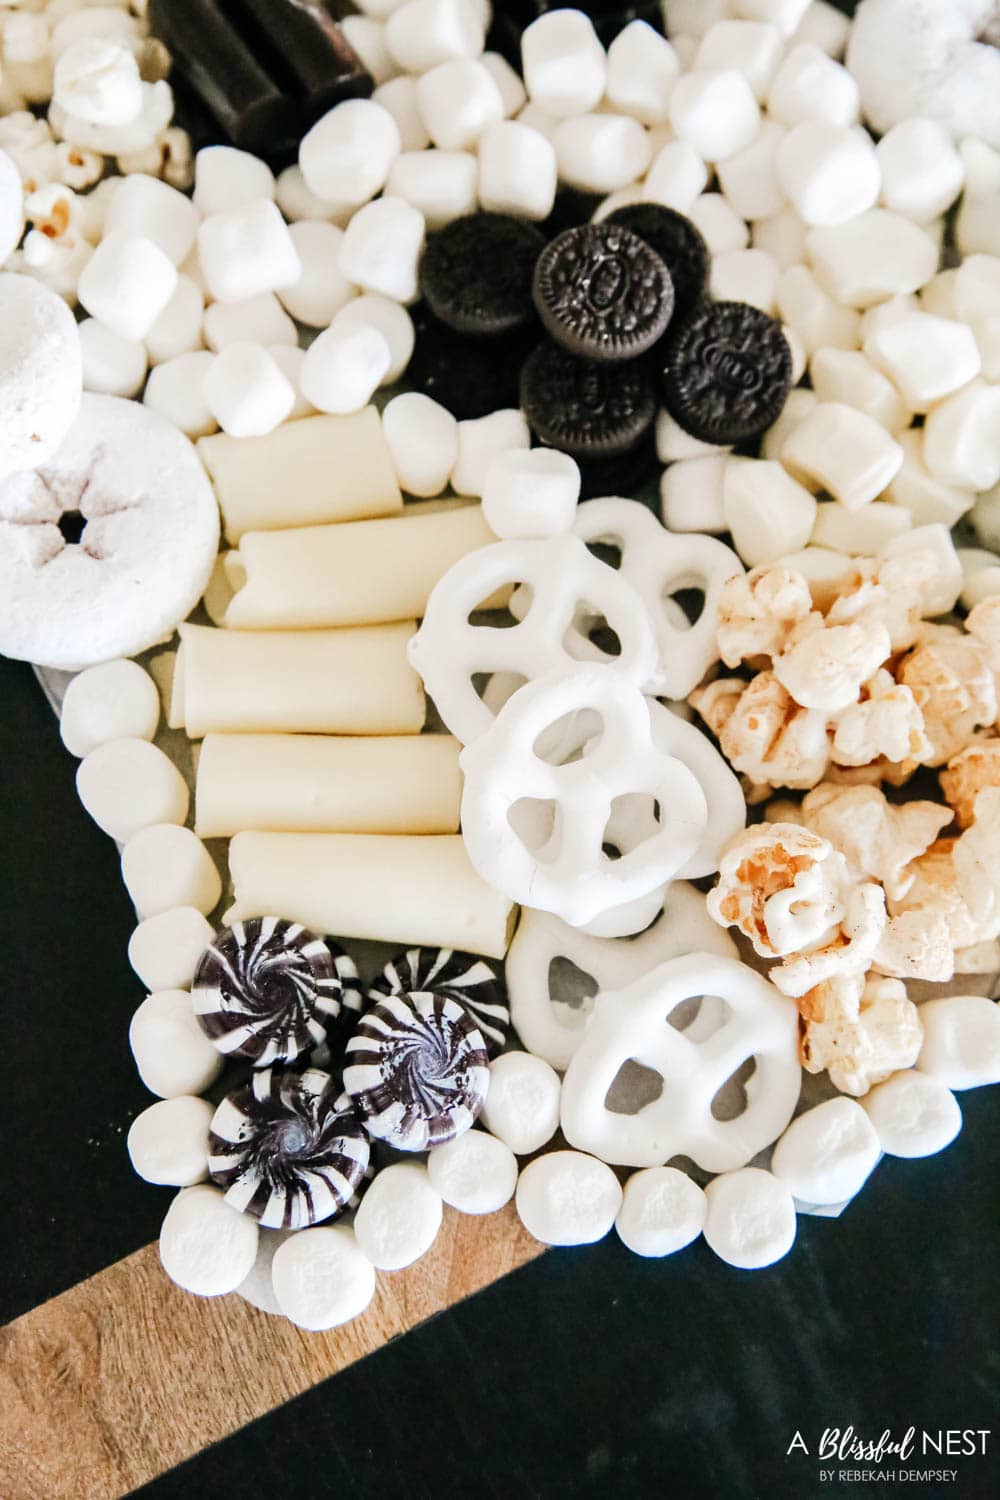 Black and white mints add pattern to the other white candies.